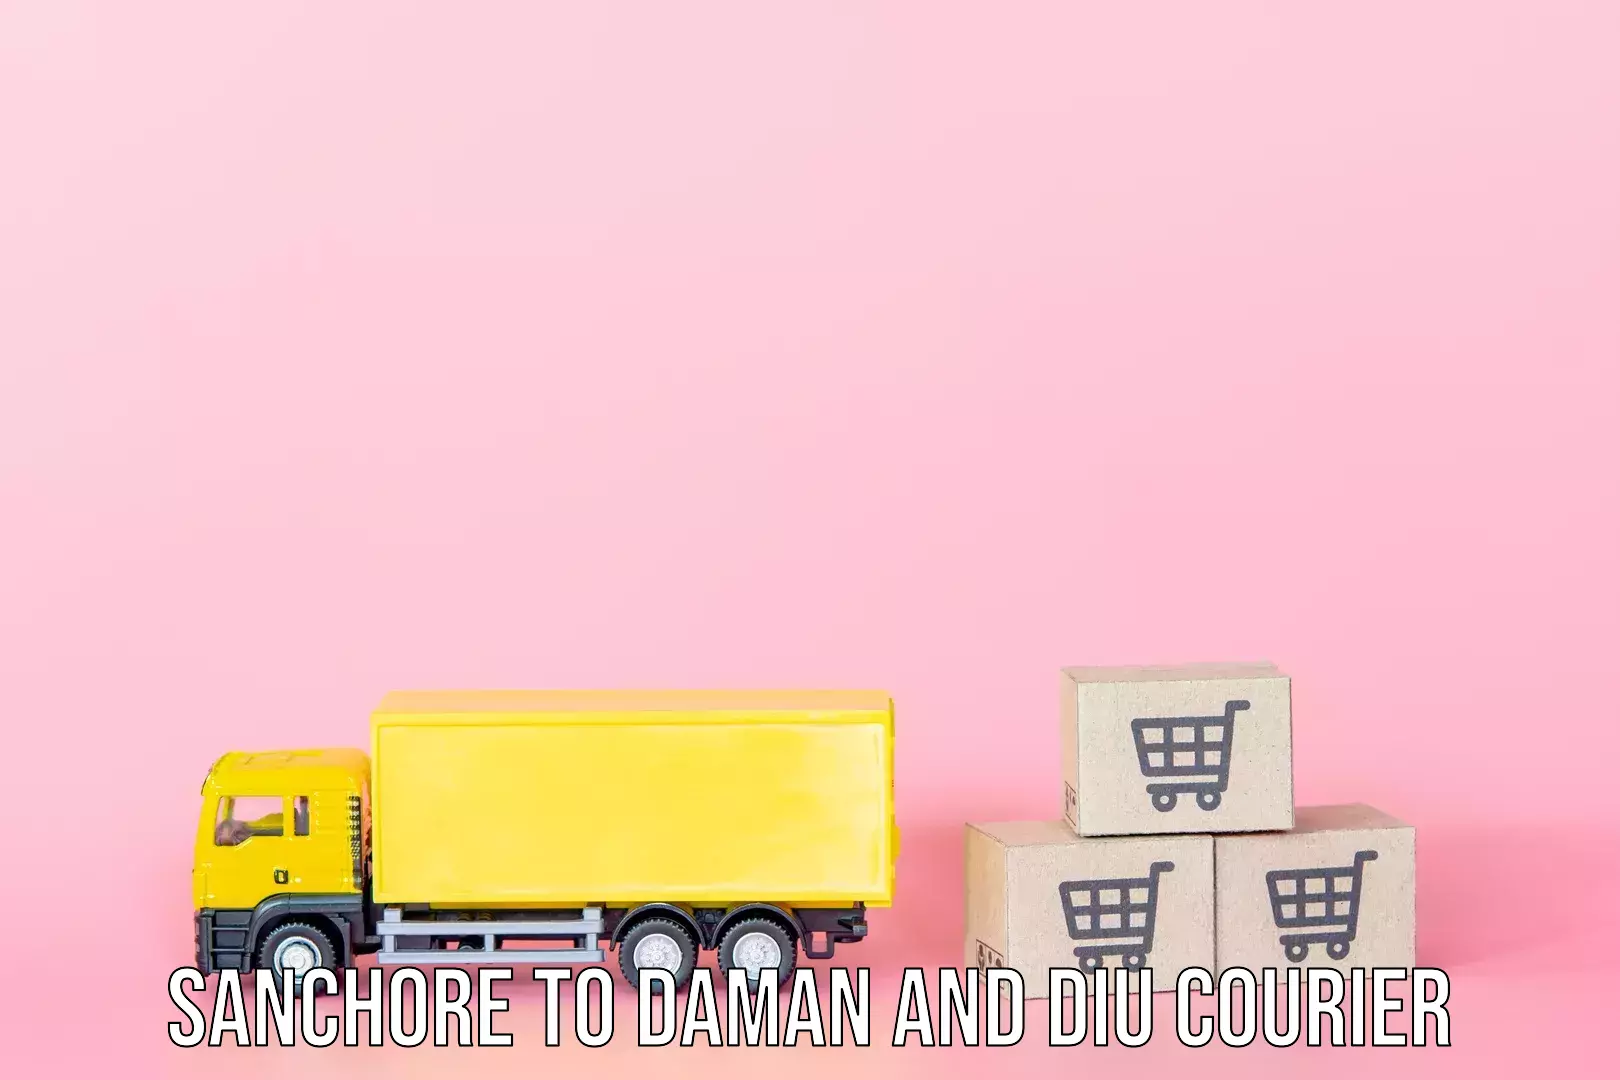 Simplified luggage transport Sanchore to Daman and Diu